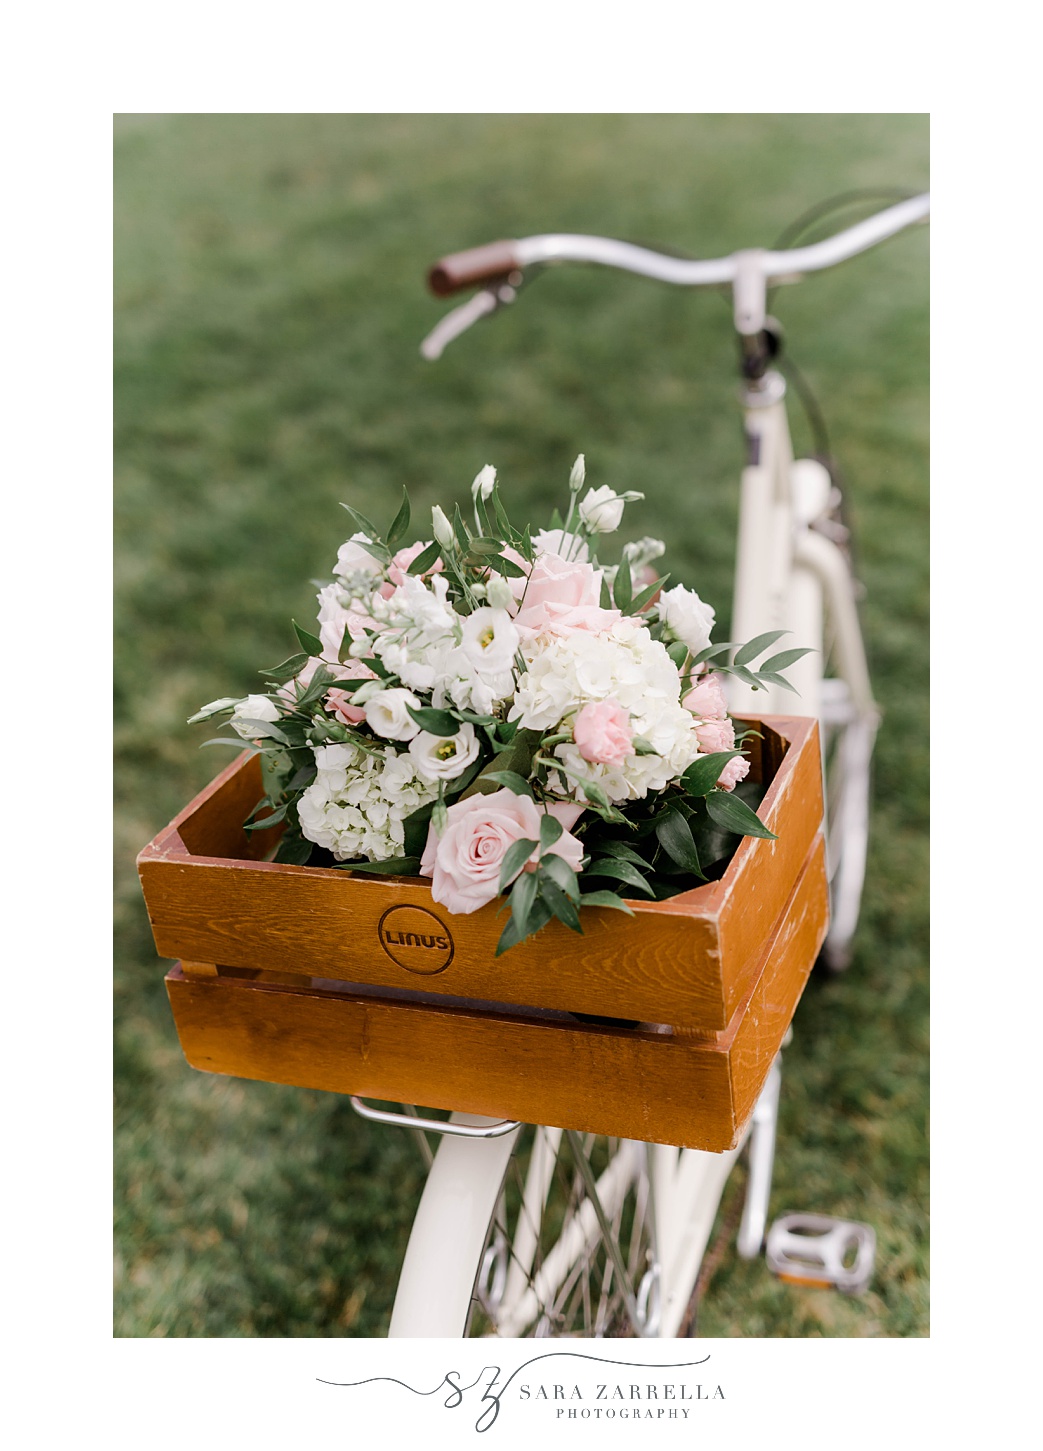 bike with pink and white flowers on back for ceremony decor at Gurney’s Newport